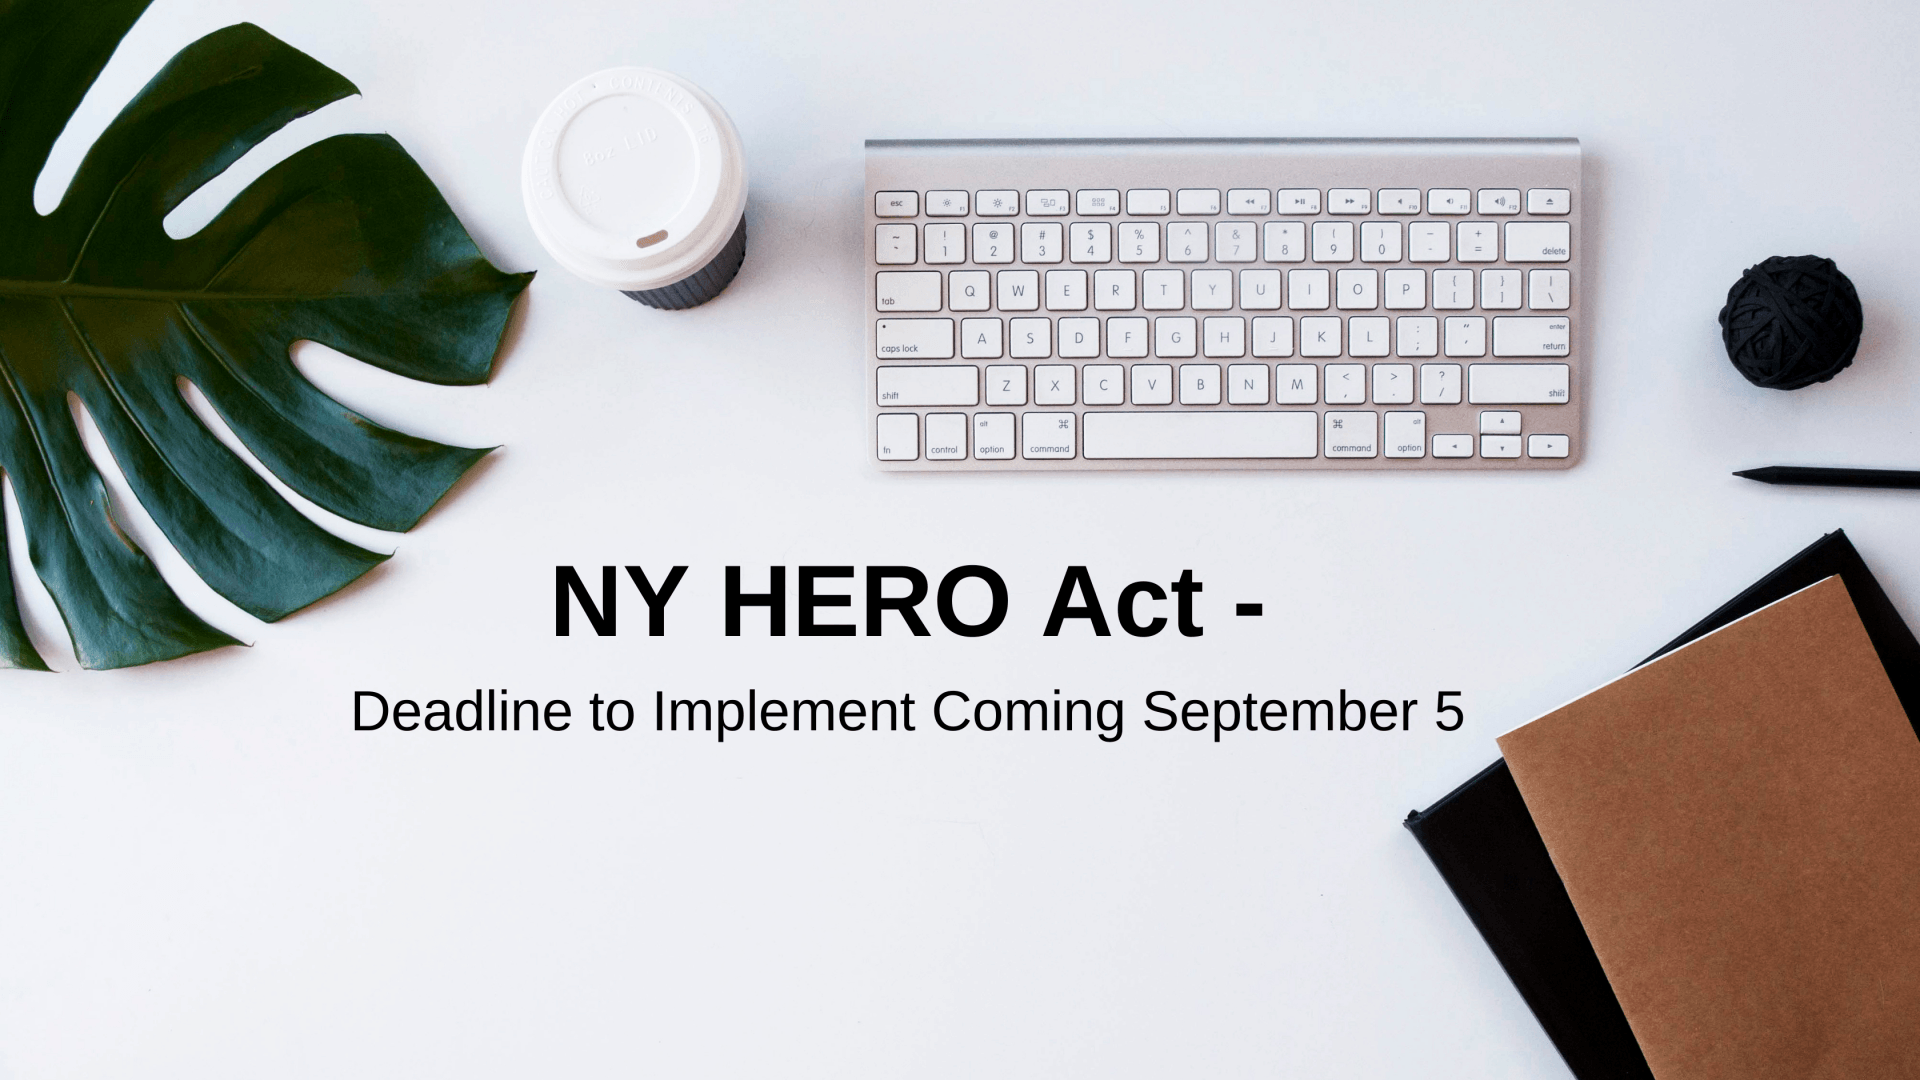 NY HERO Act – Deadline to Implement Coming September 5